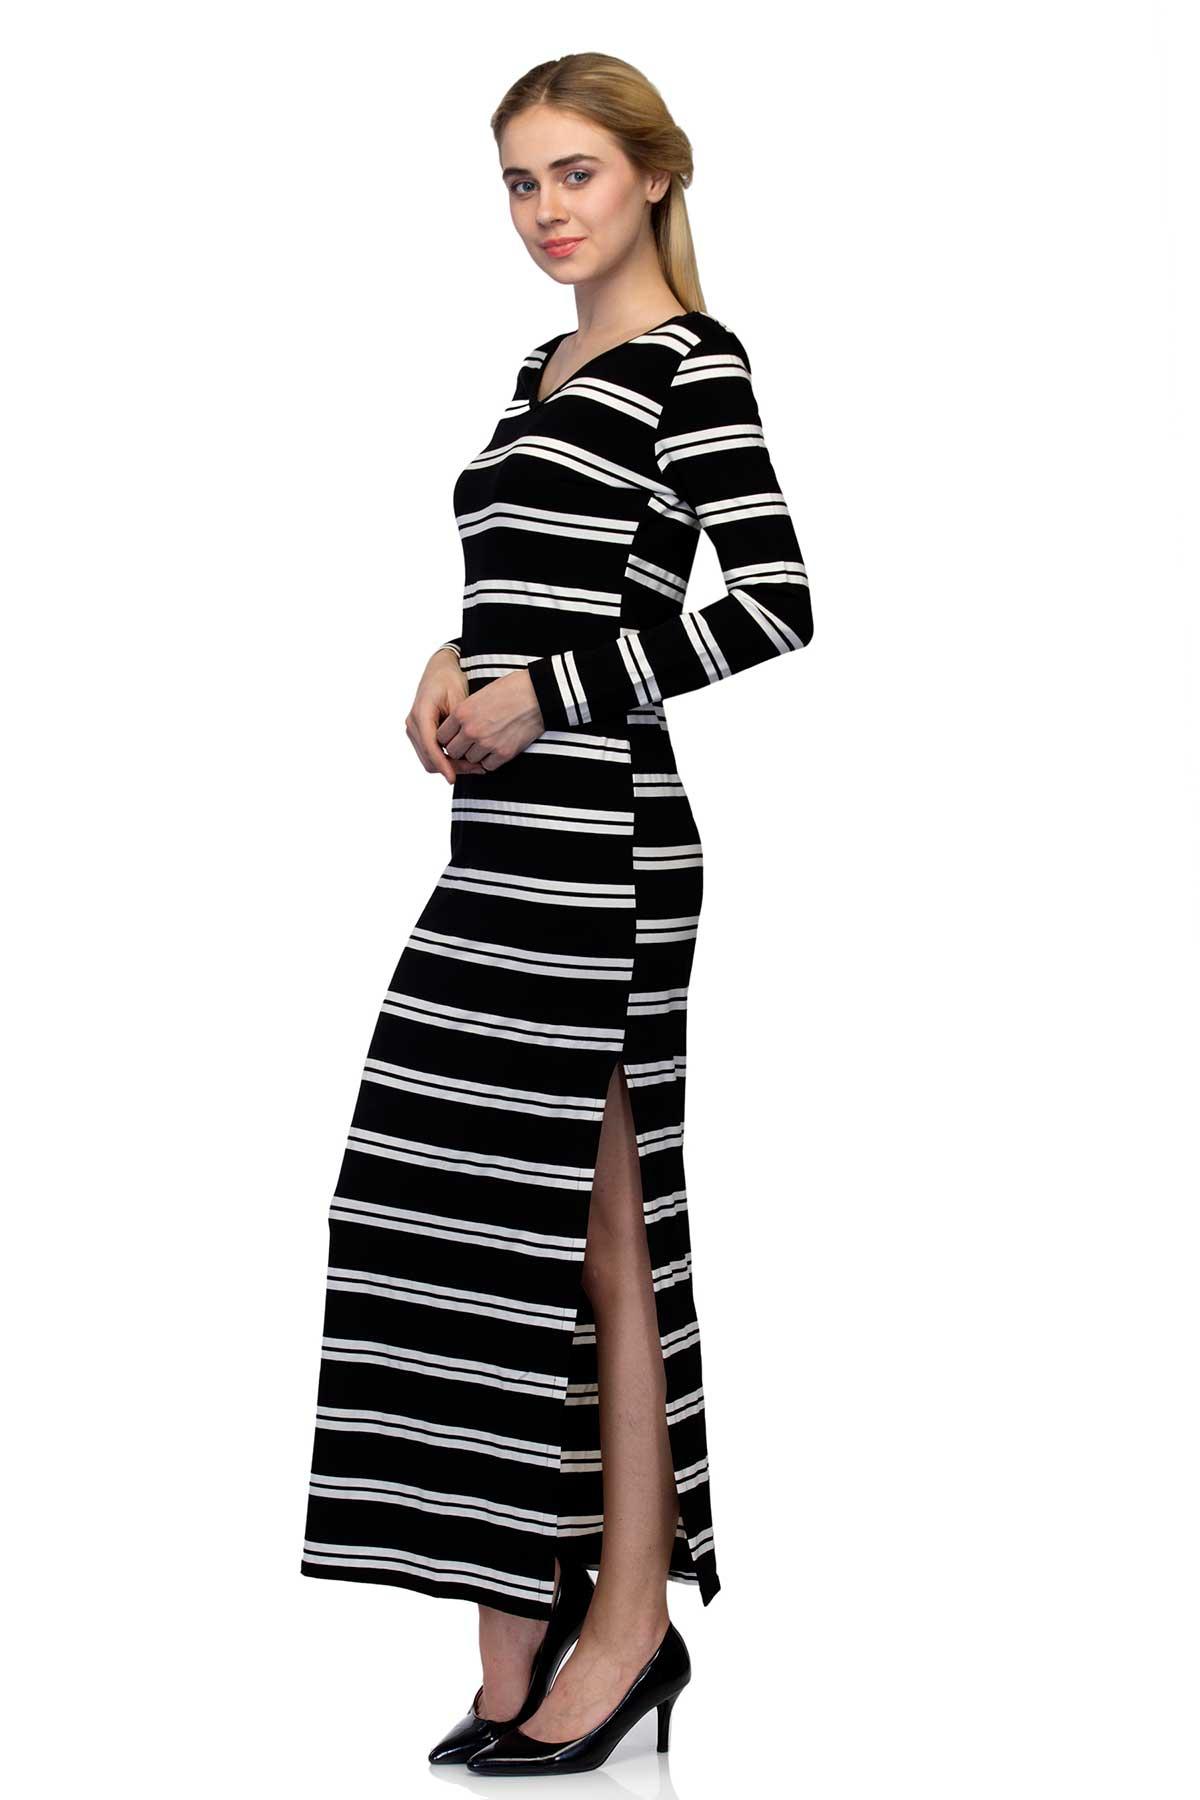 Black and white Long Striped Dress by RIB for rent online | FLYROBE